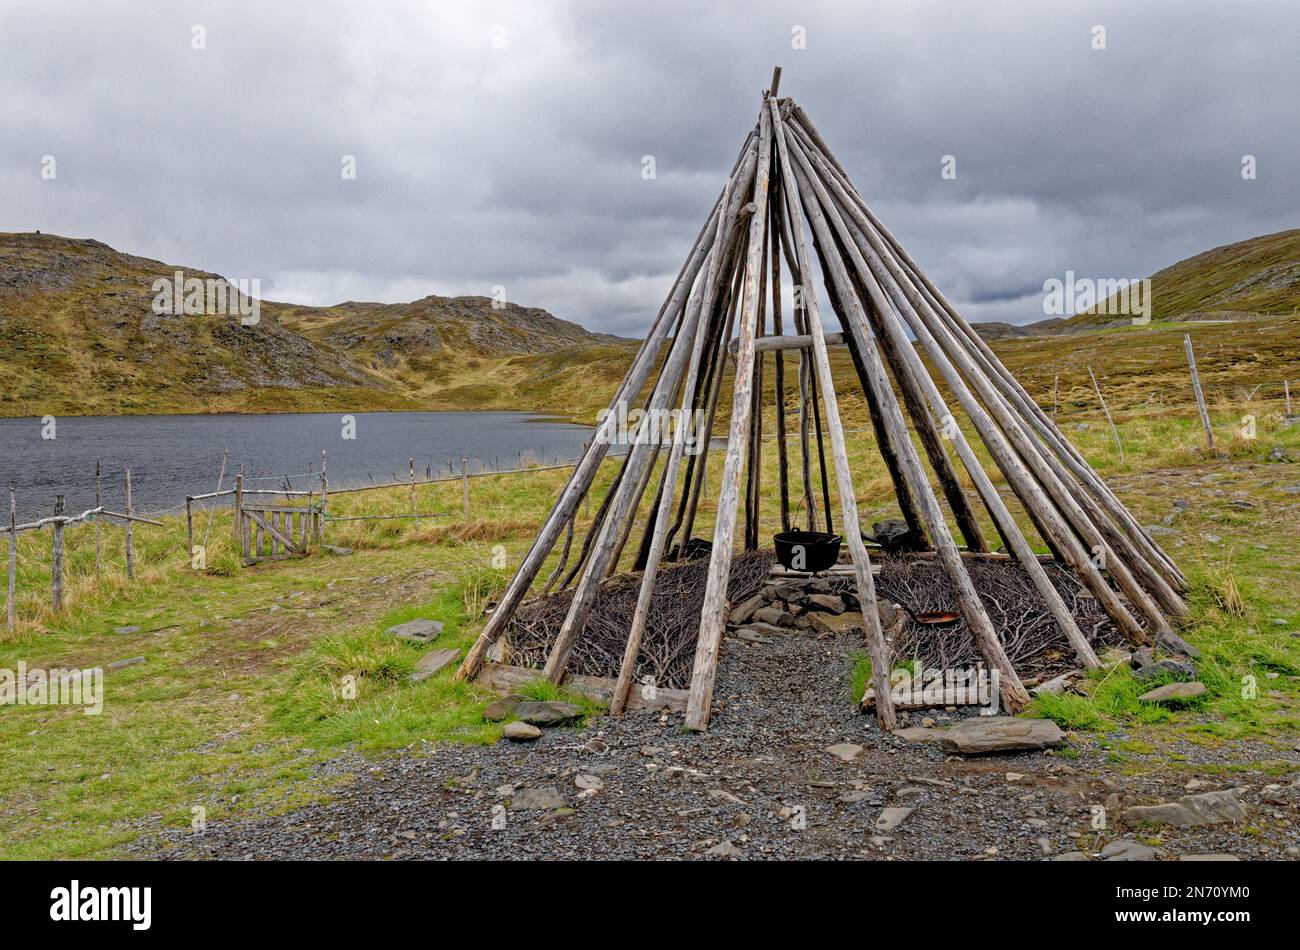 Lavvu - Sami tent in Nordkapp peninsula - Norway. Lavvu is a temporary dwelling used by the Sami people of northern extremes of Northern Europe. Stock Photo